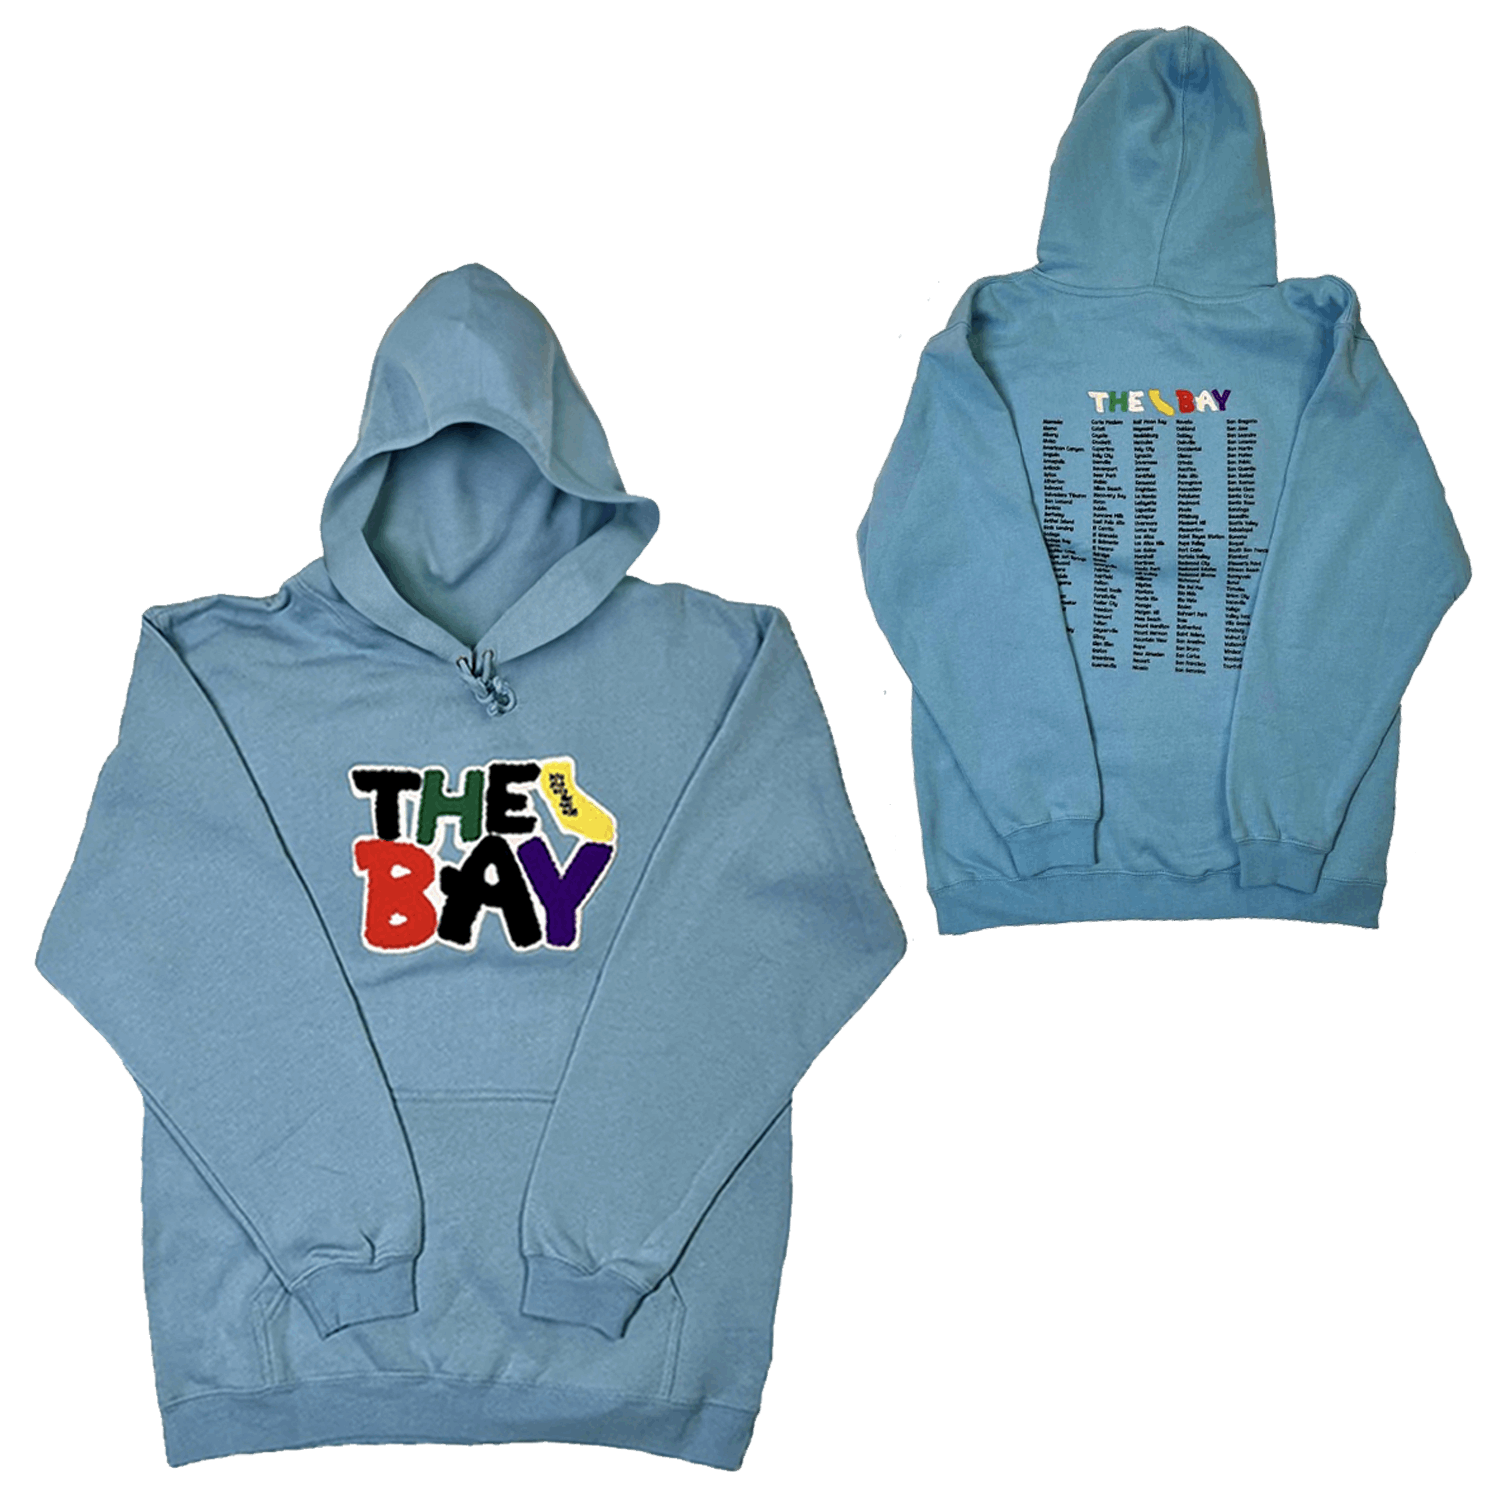 Stylish and vibrant baby blue hoodie for a bold and fashionable look.